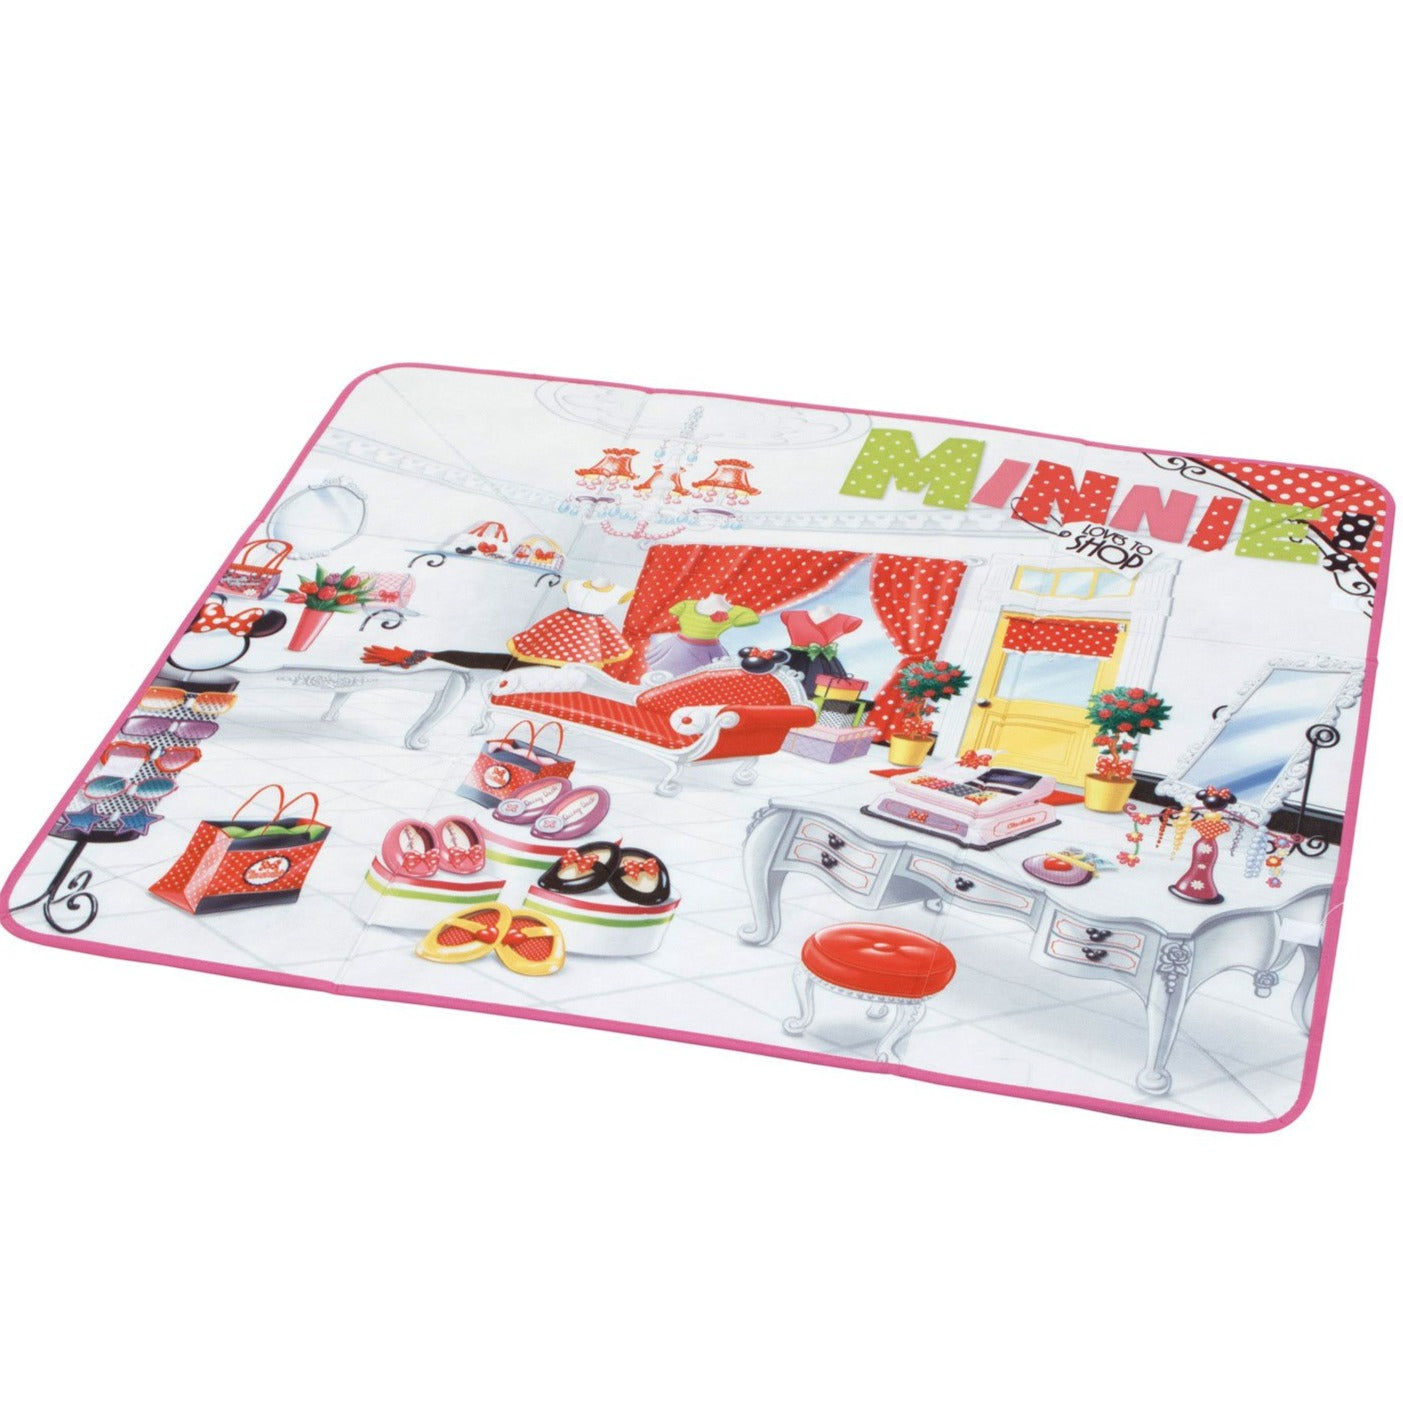 Minnie Mouse Fabric Storage Box With Playmat